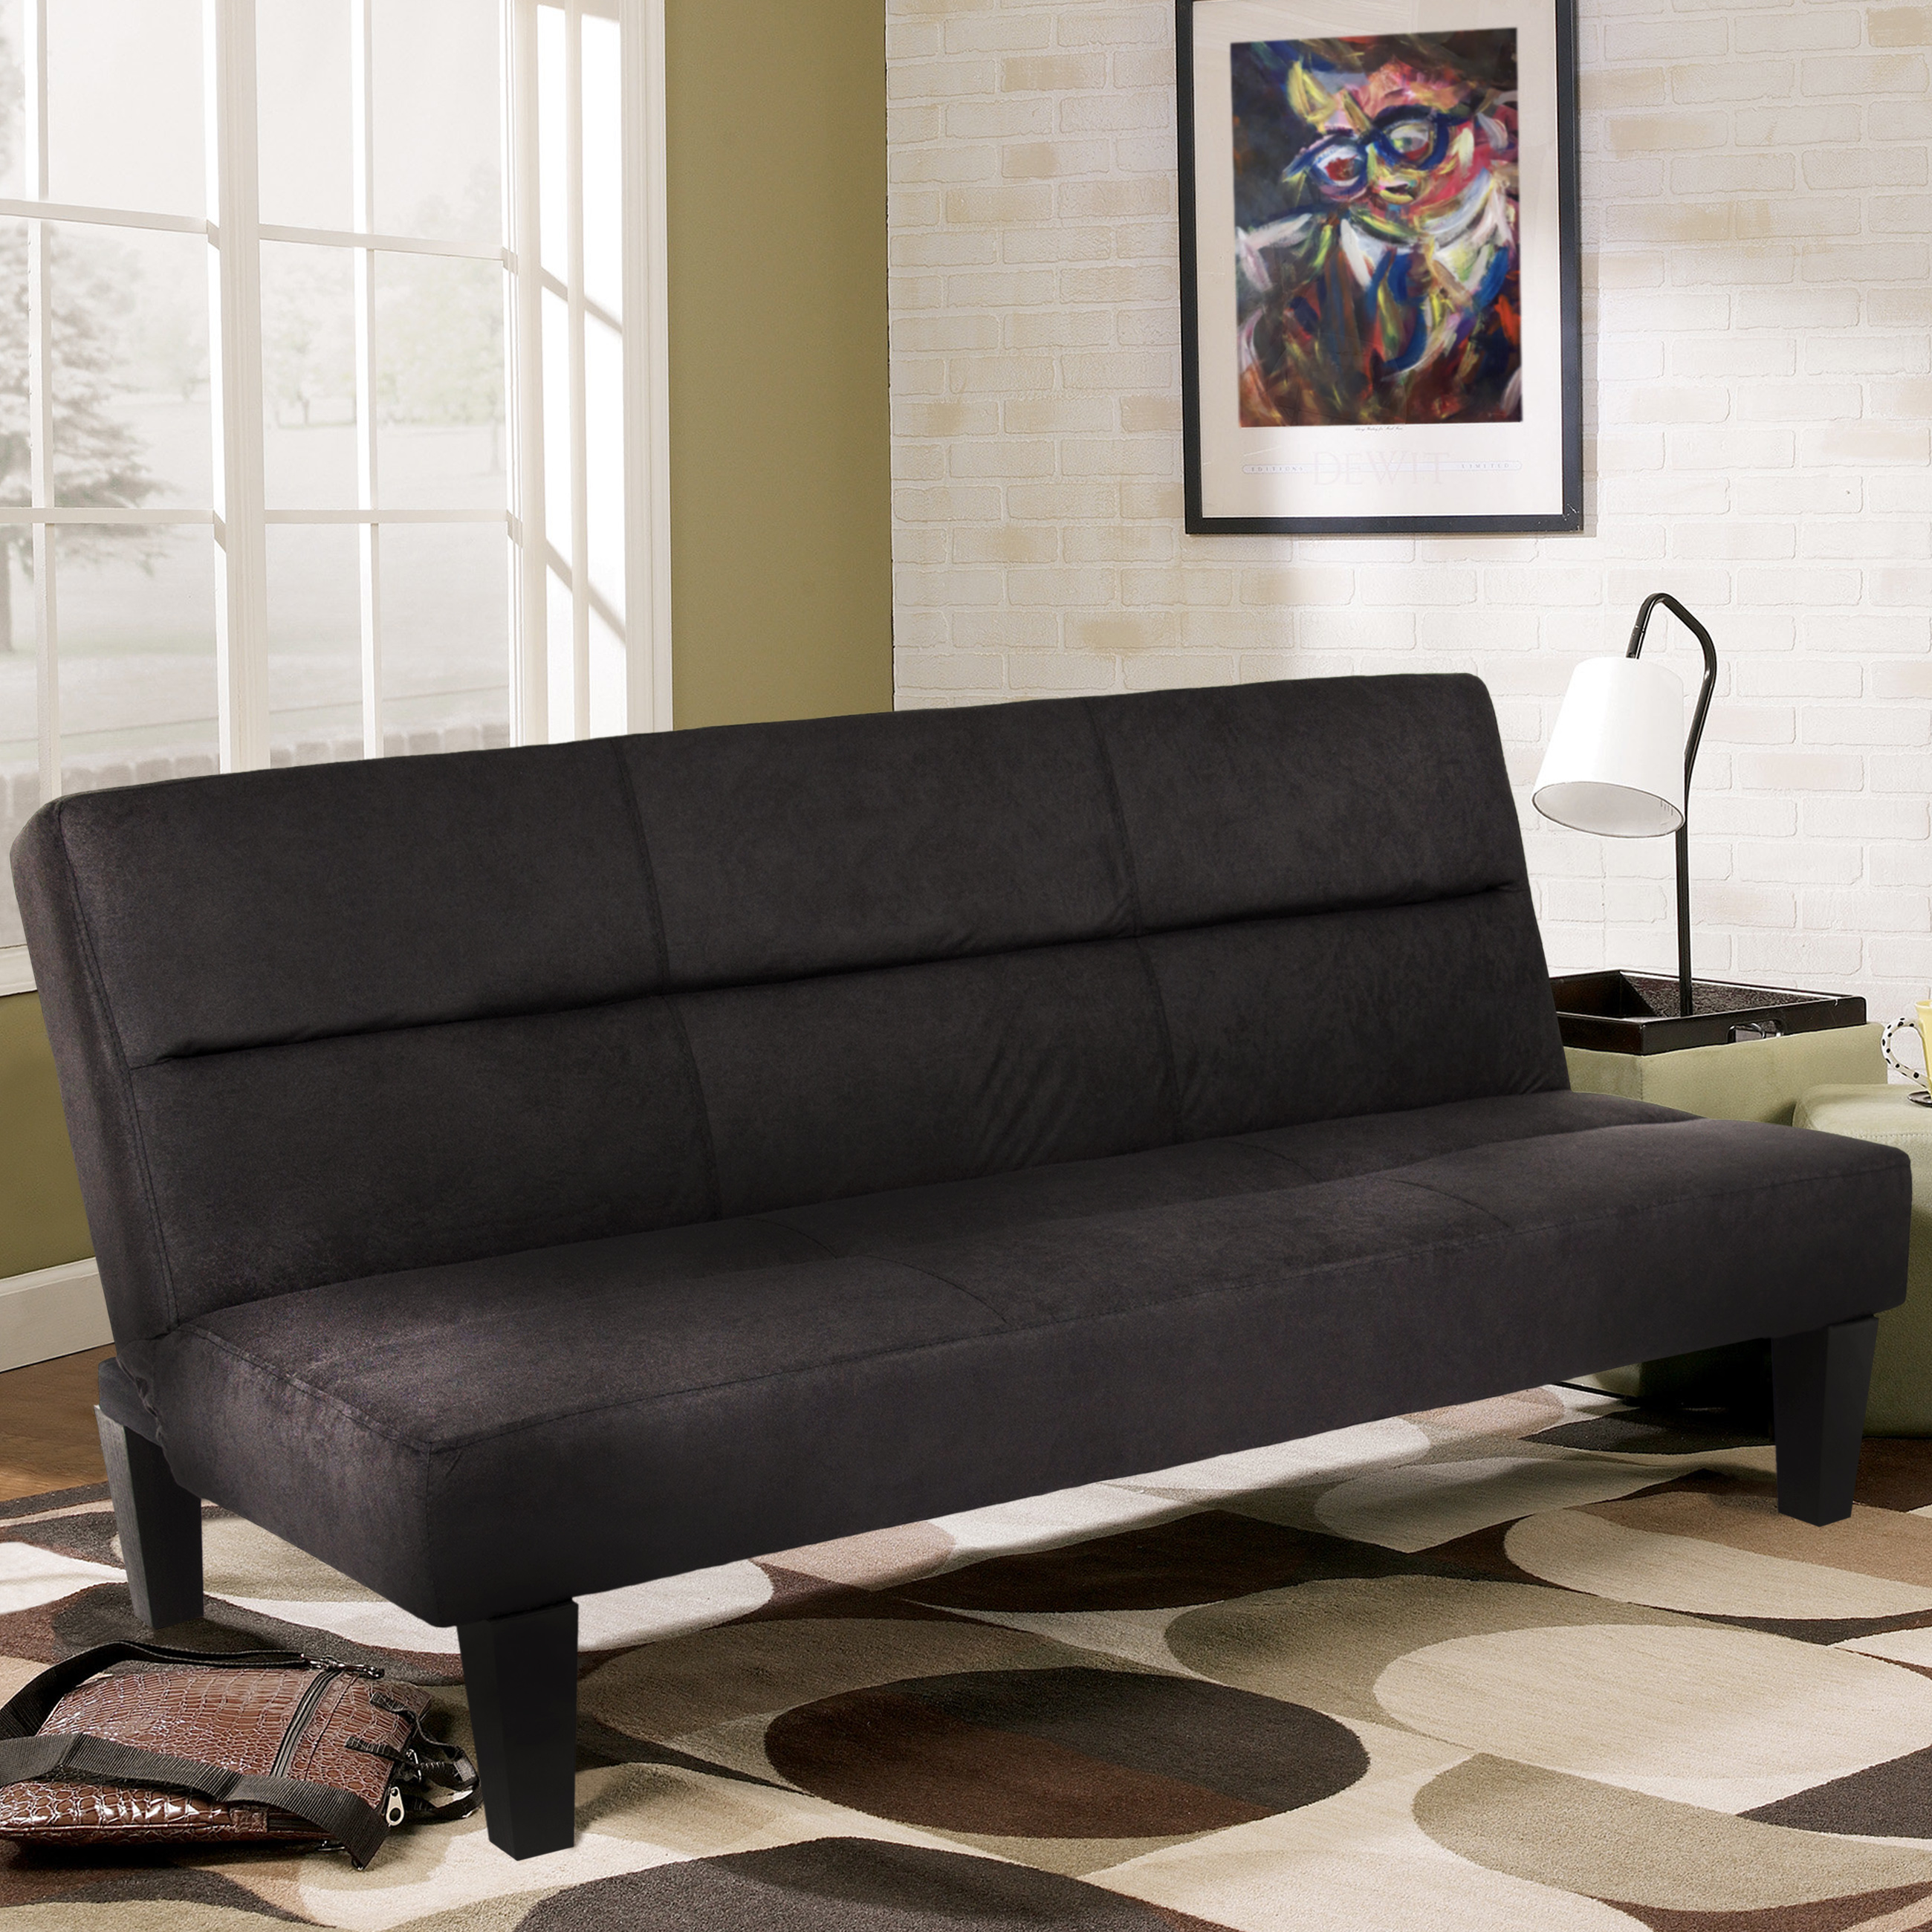 Price drop! Best Choice Products microfiber futon folding couch sofa for $100